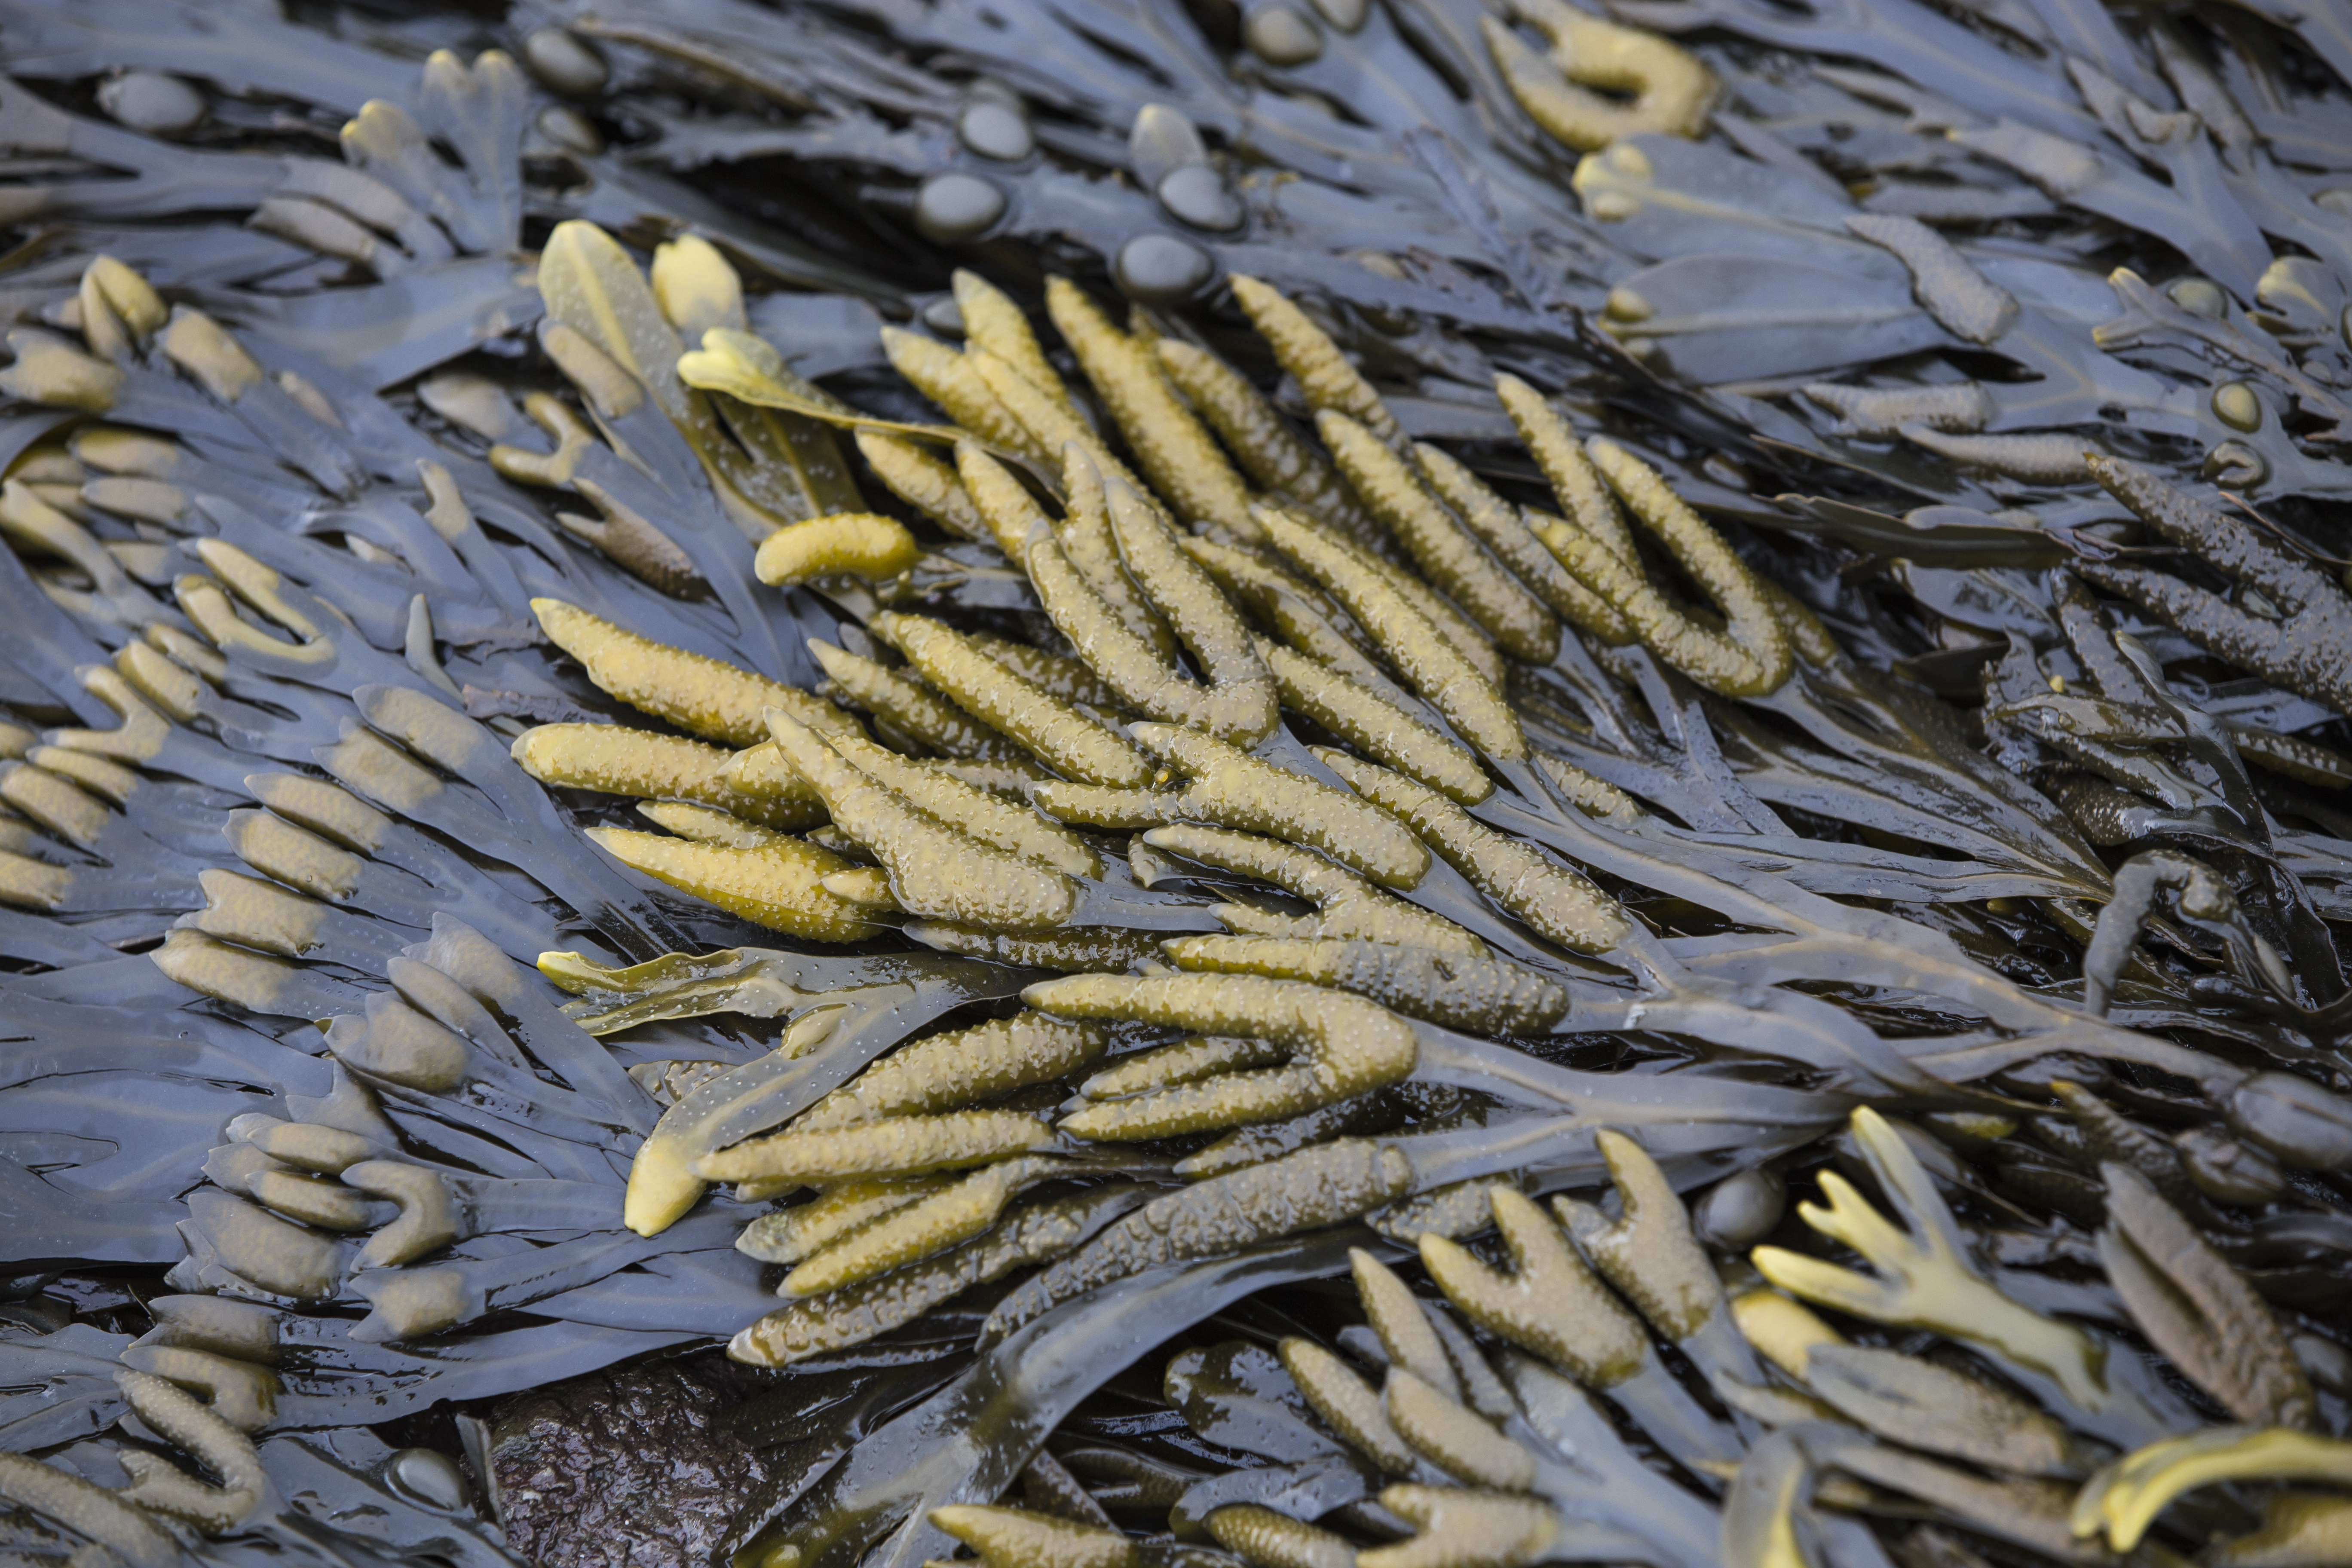 Seaweed Industry Could Unlock €9 Billion Opportunity and  Create 115,000 Jobs in Europe by 2030